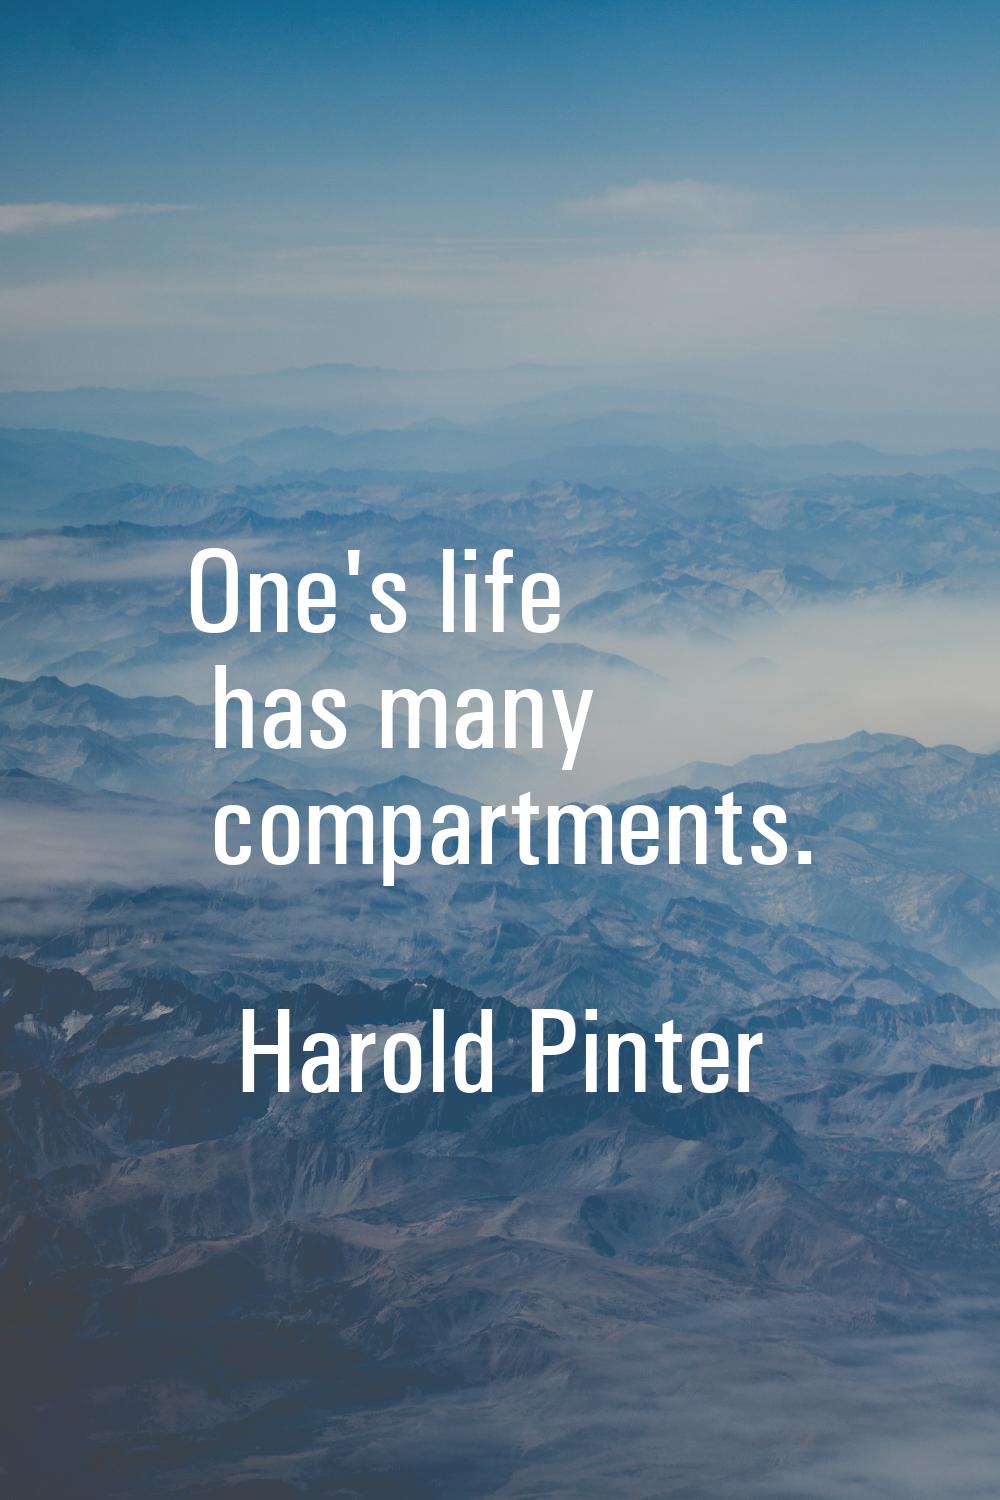 One's life has many compartments.